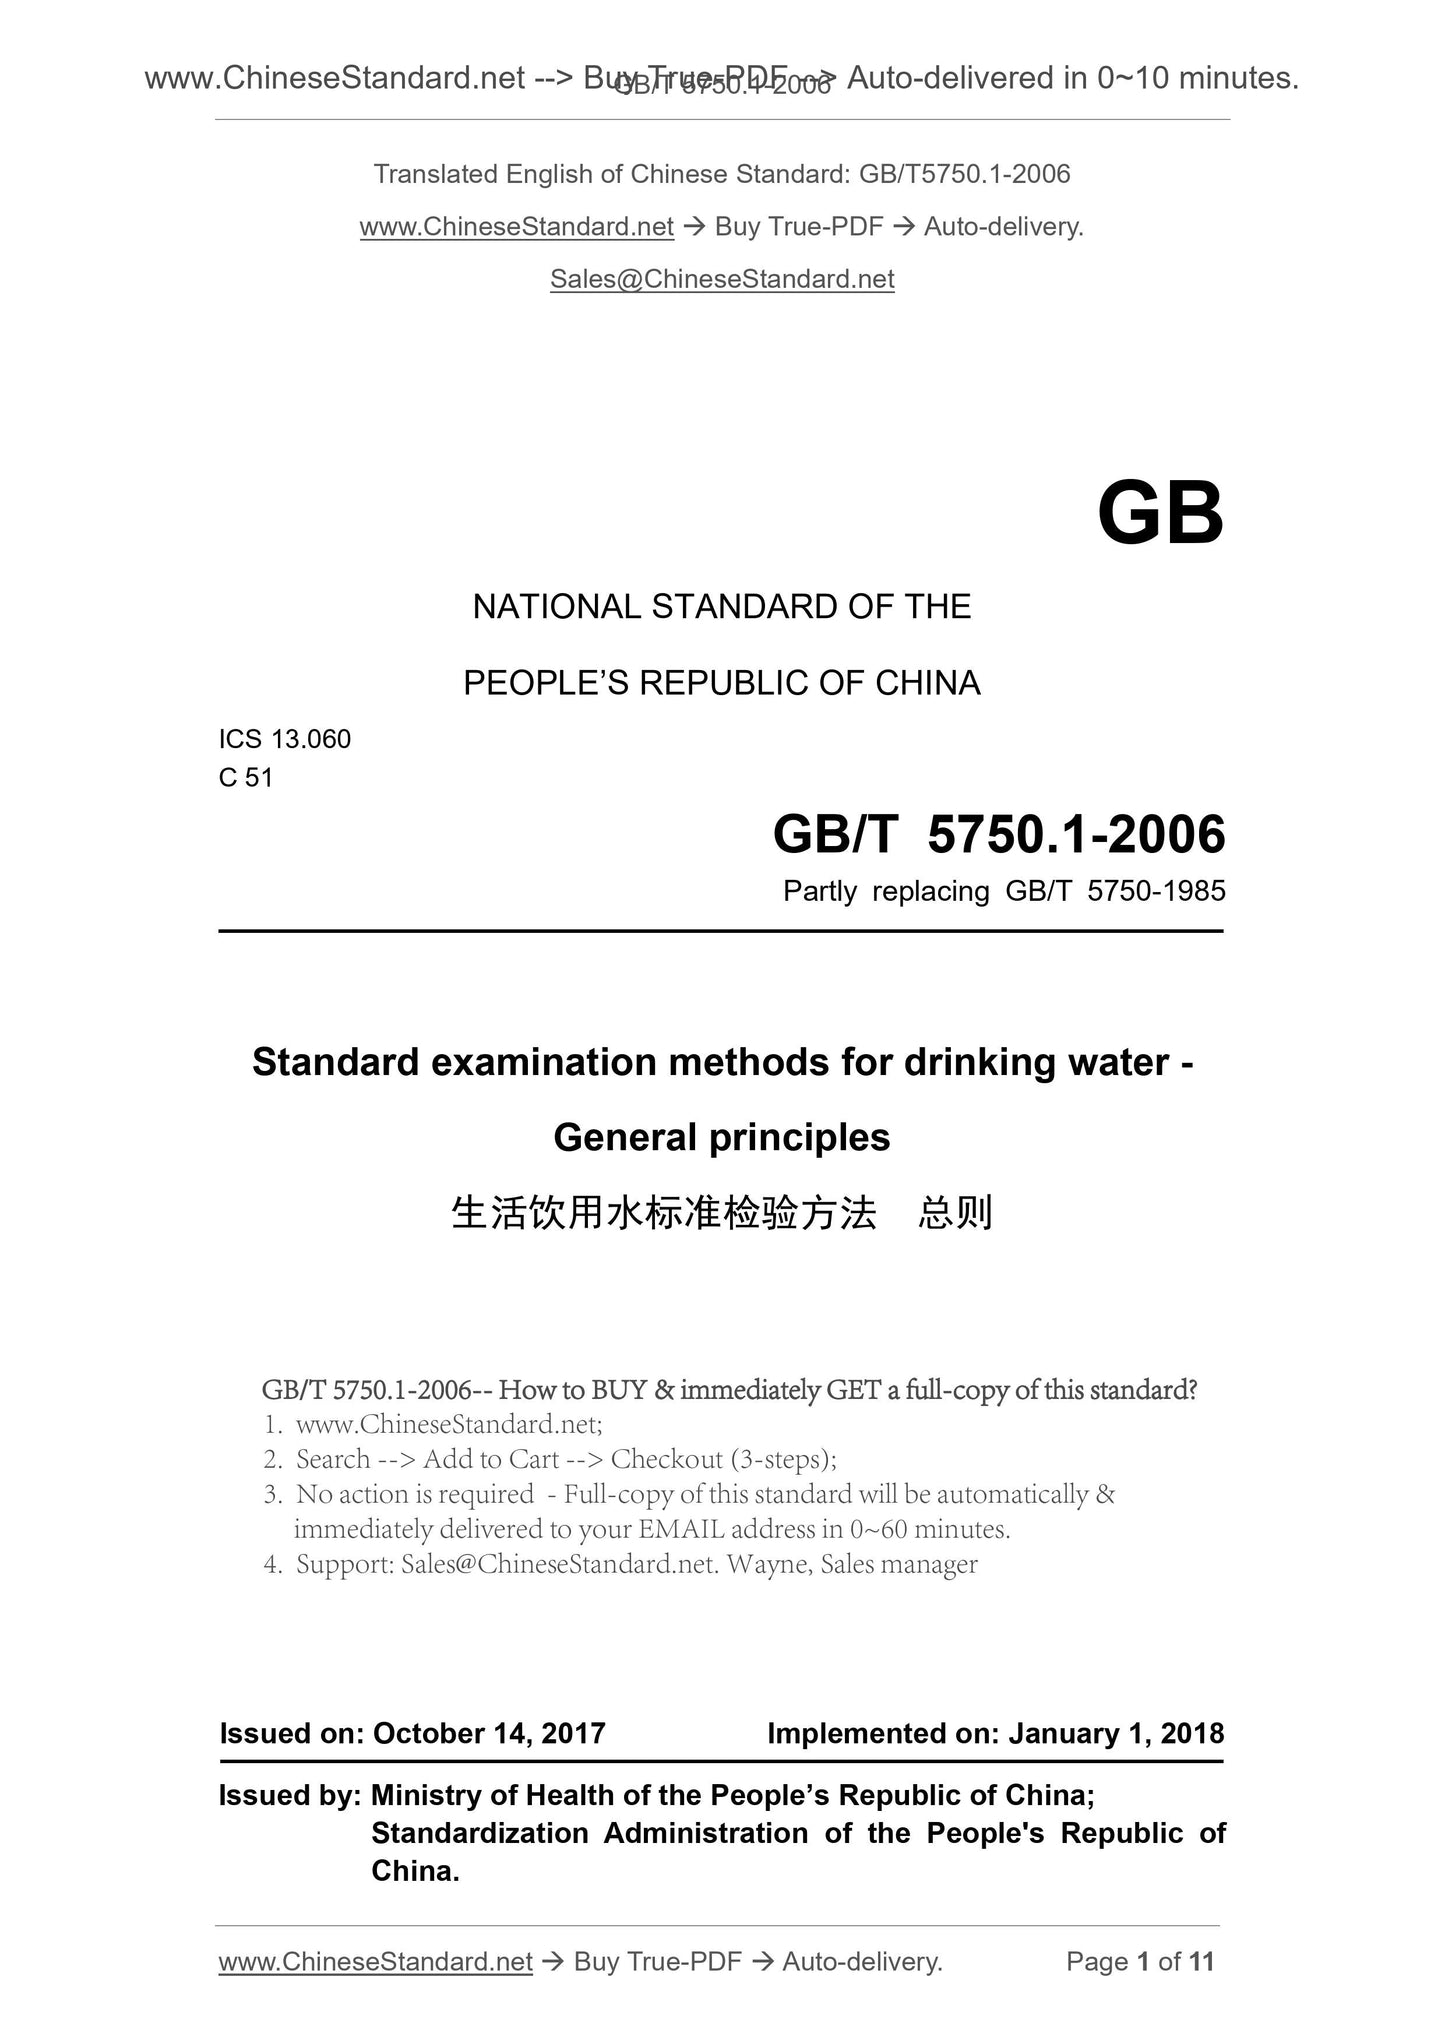 GB/T 5750.1-2006 Page 1